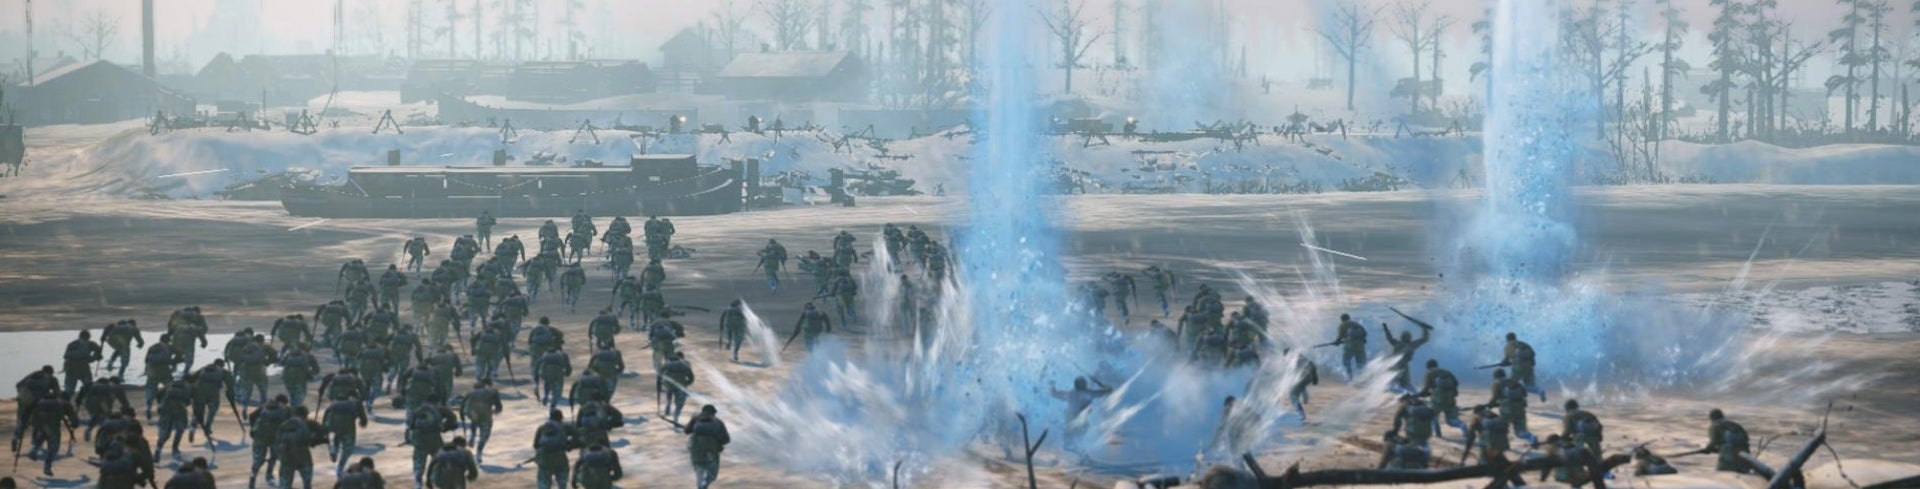 Image for Company of Heroes 2 review